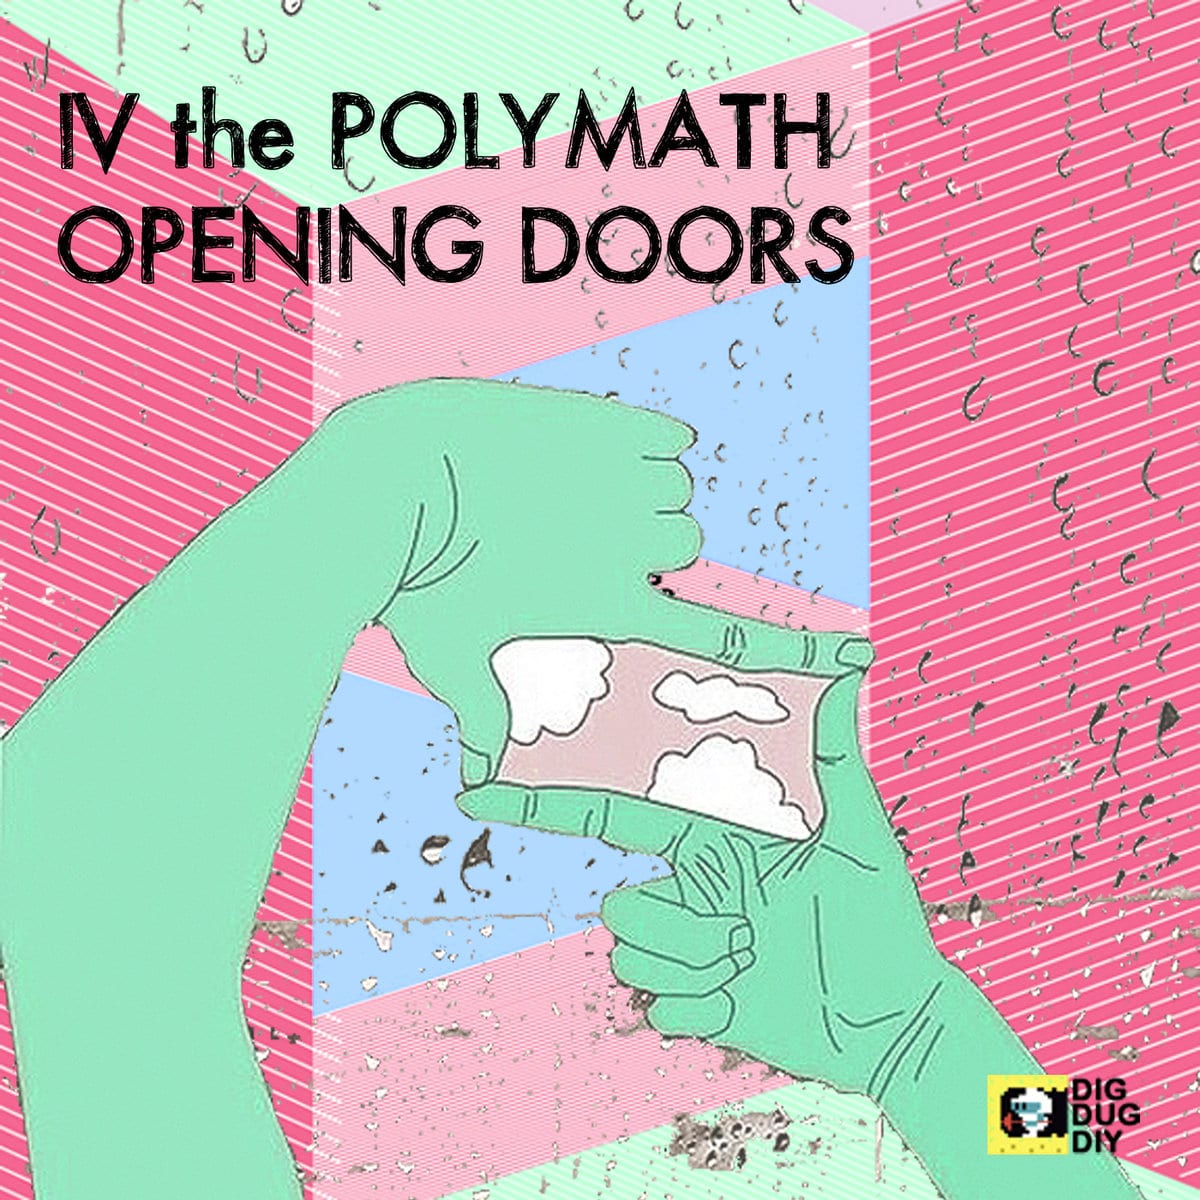 IV the Polymath - "Opening Doors" (Release)